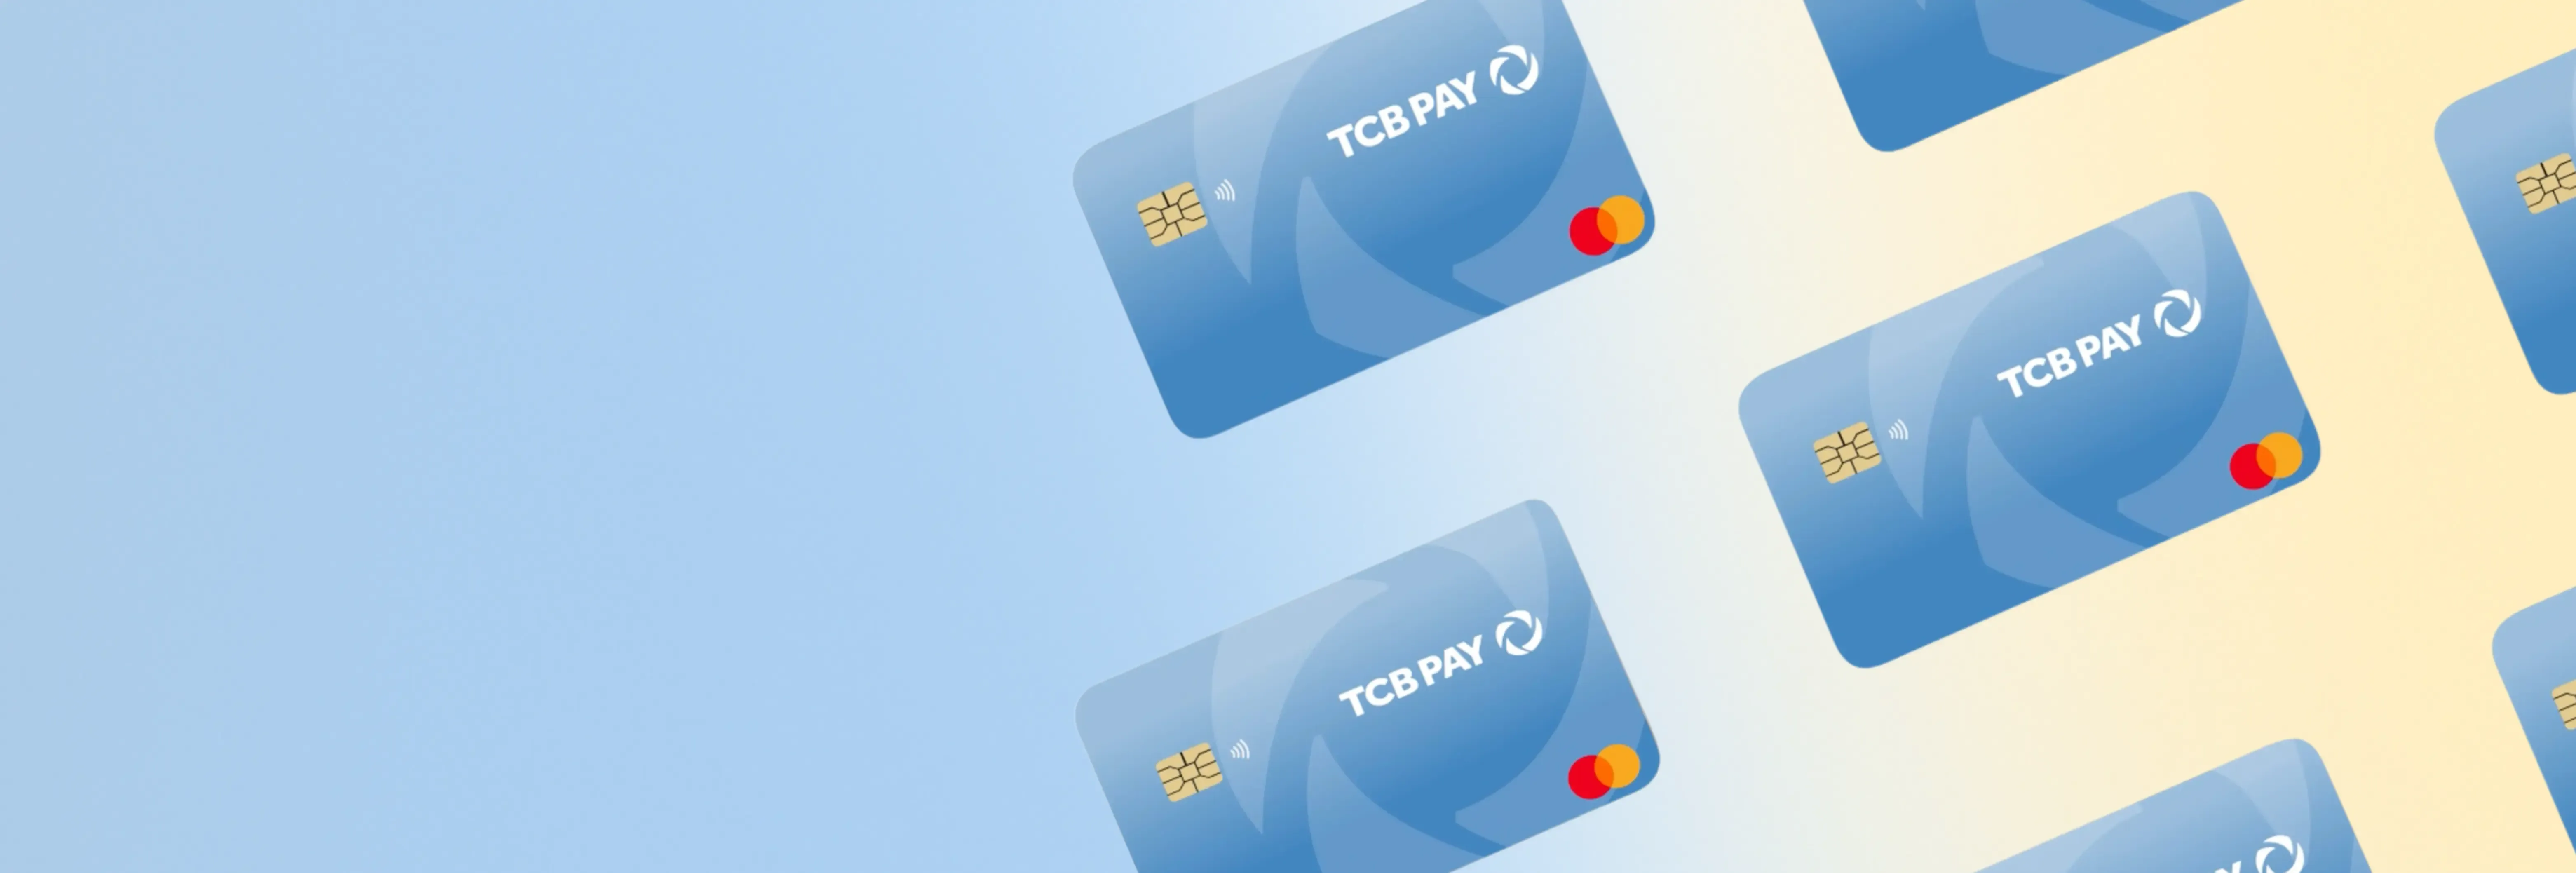 Credit card tcb payment solution